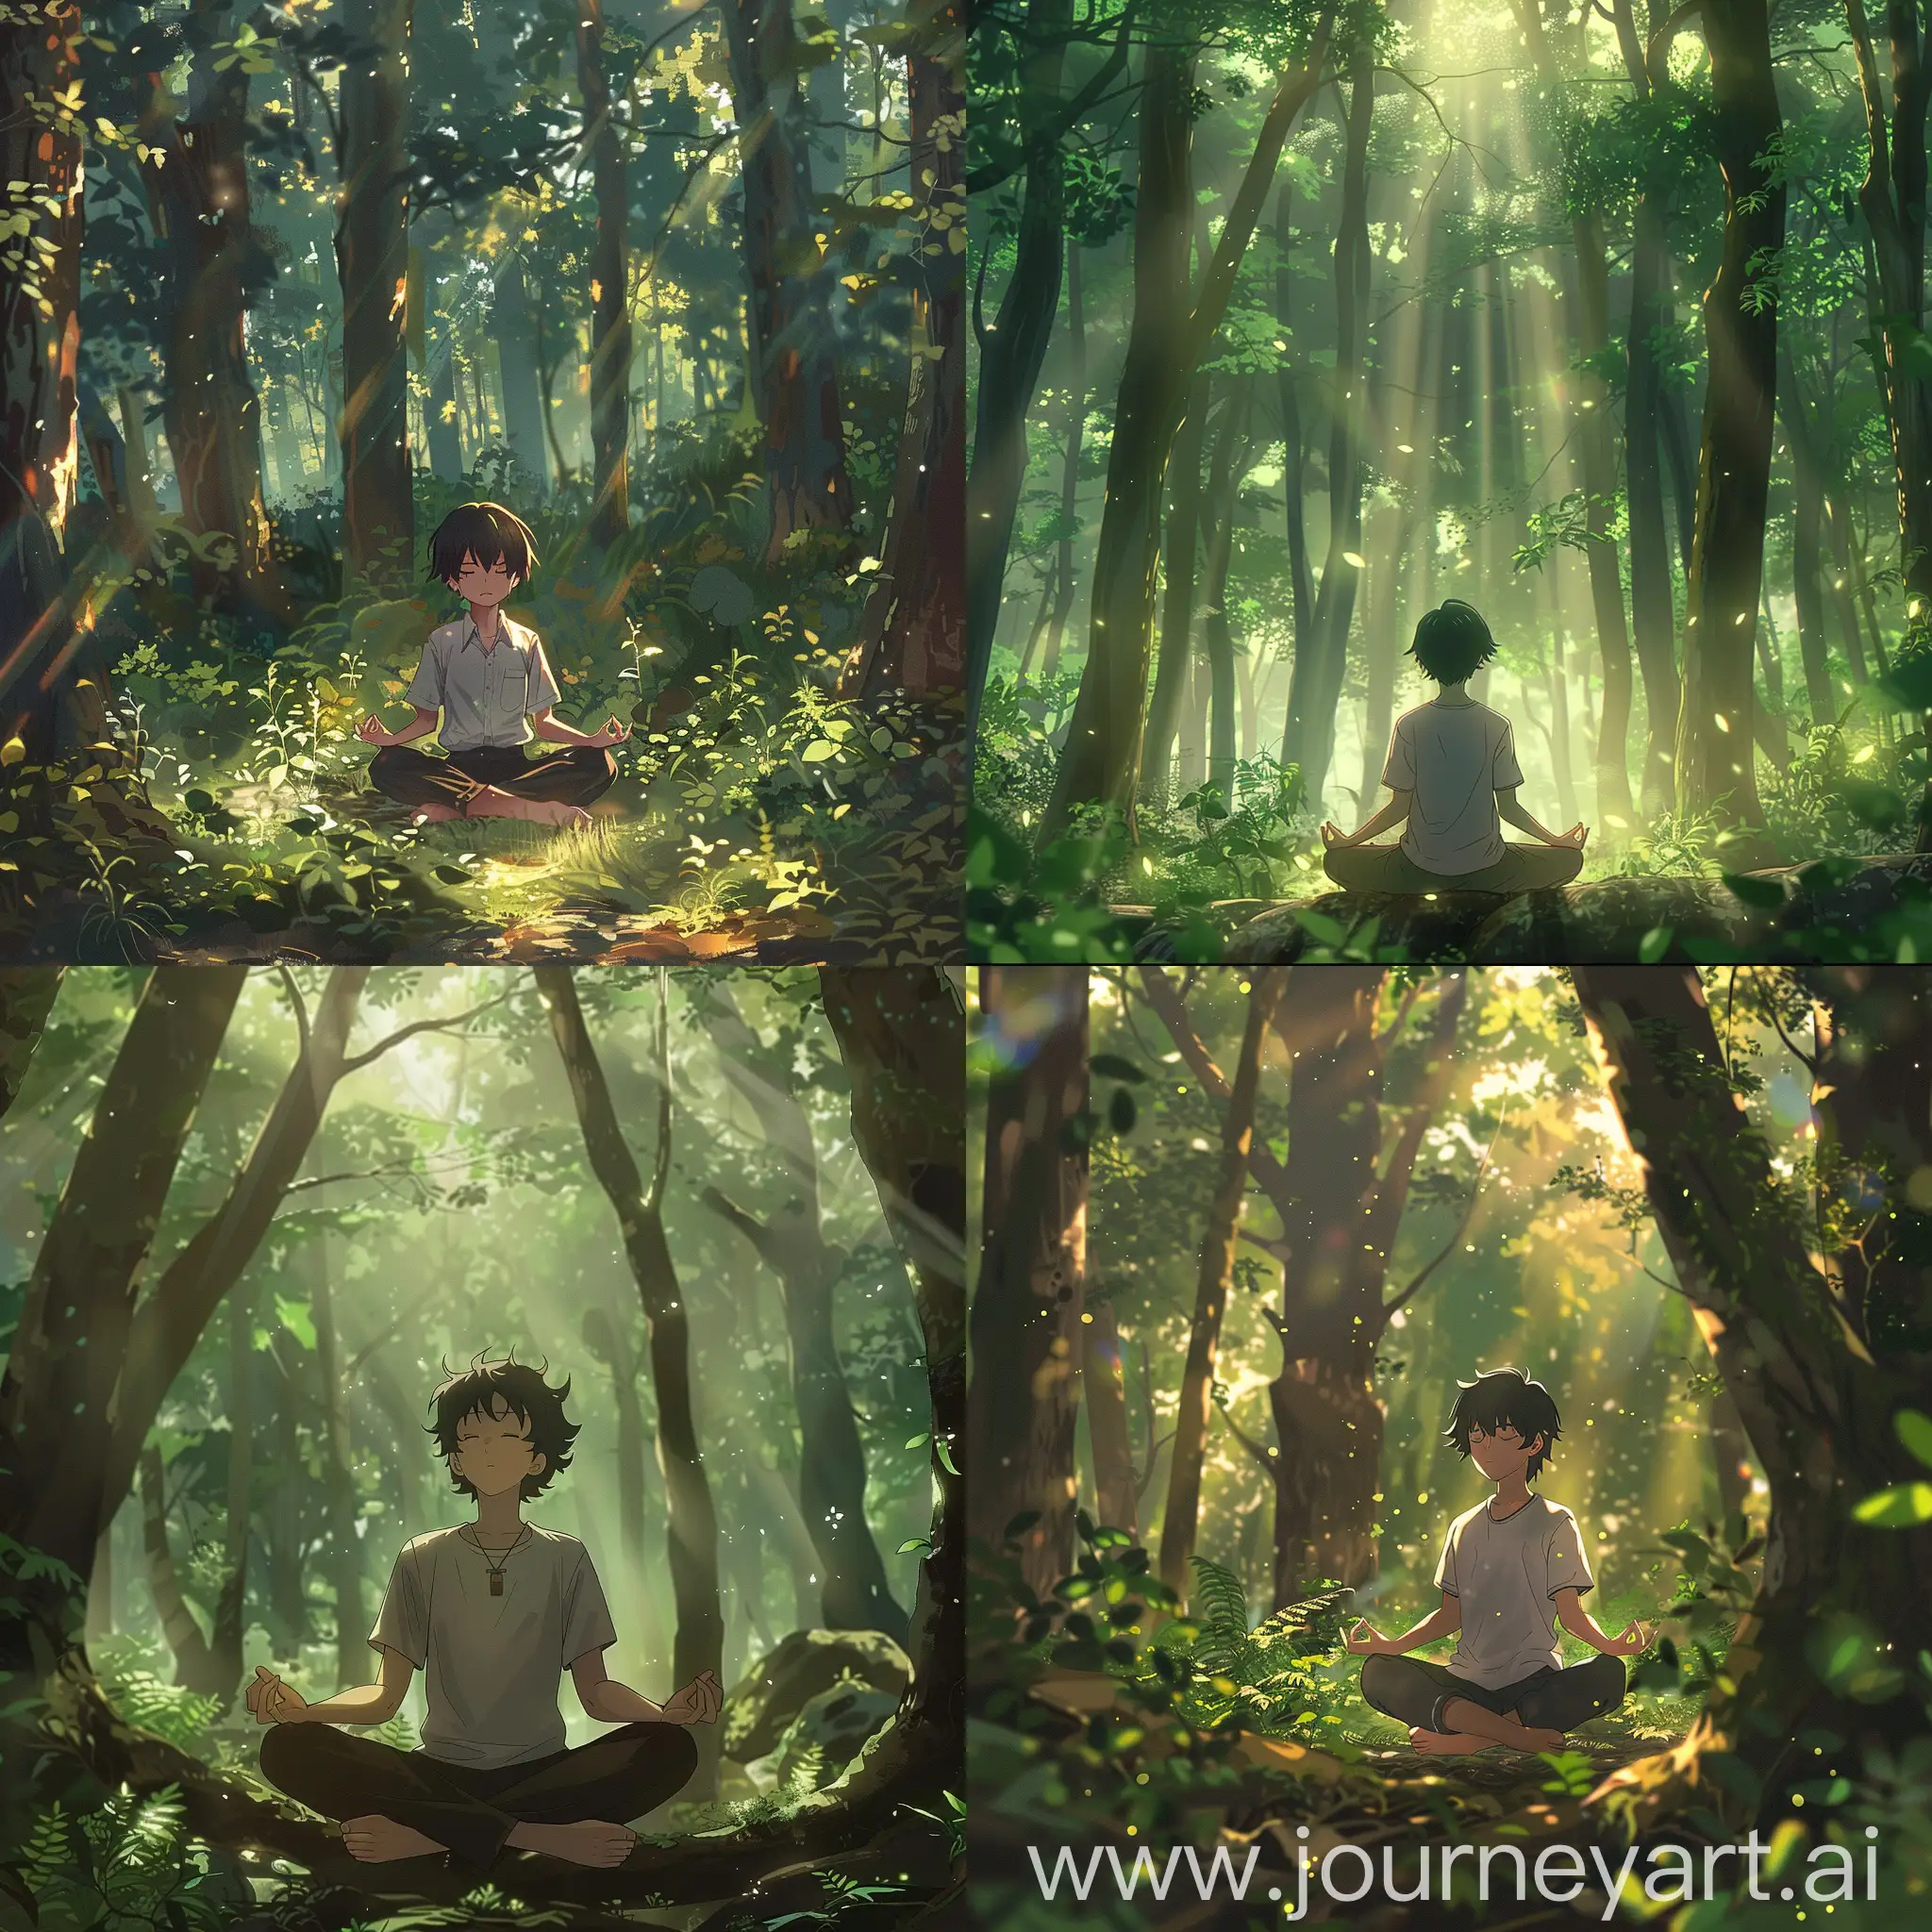 Amidst the serene forest, an anime boy finds tranquility through meditation, surrounded by the gentle whispers of nature and the dappled sunlight filtering through the